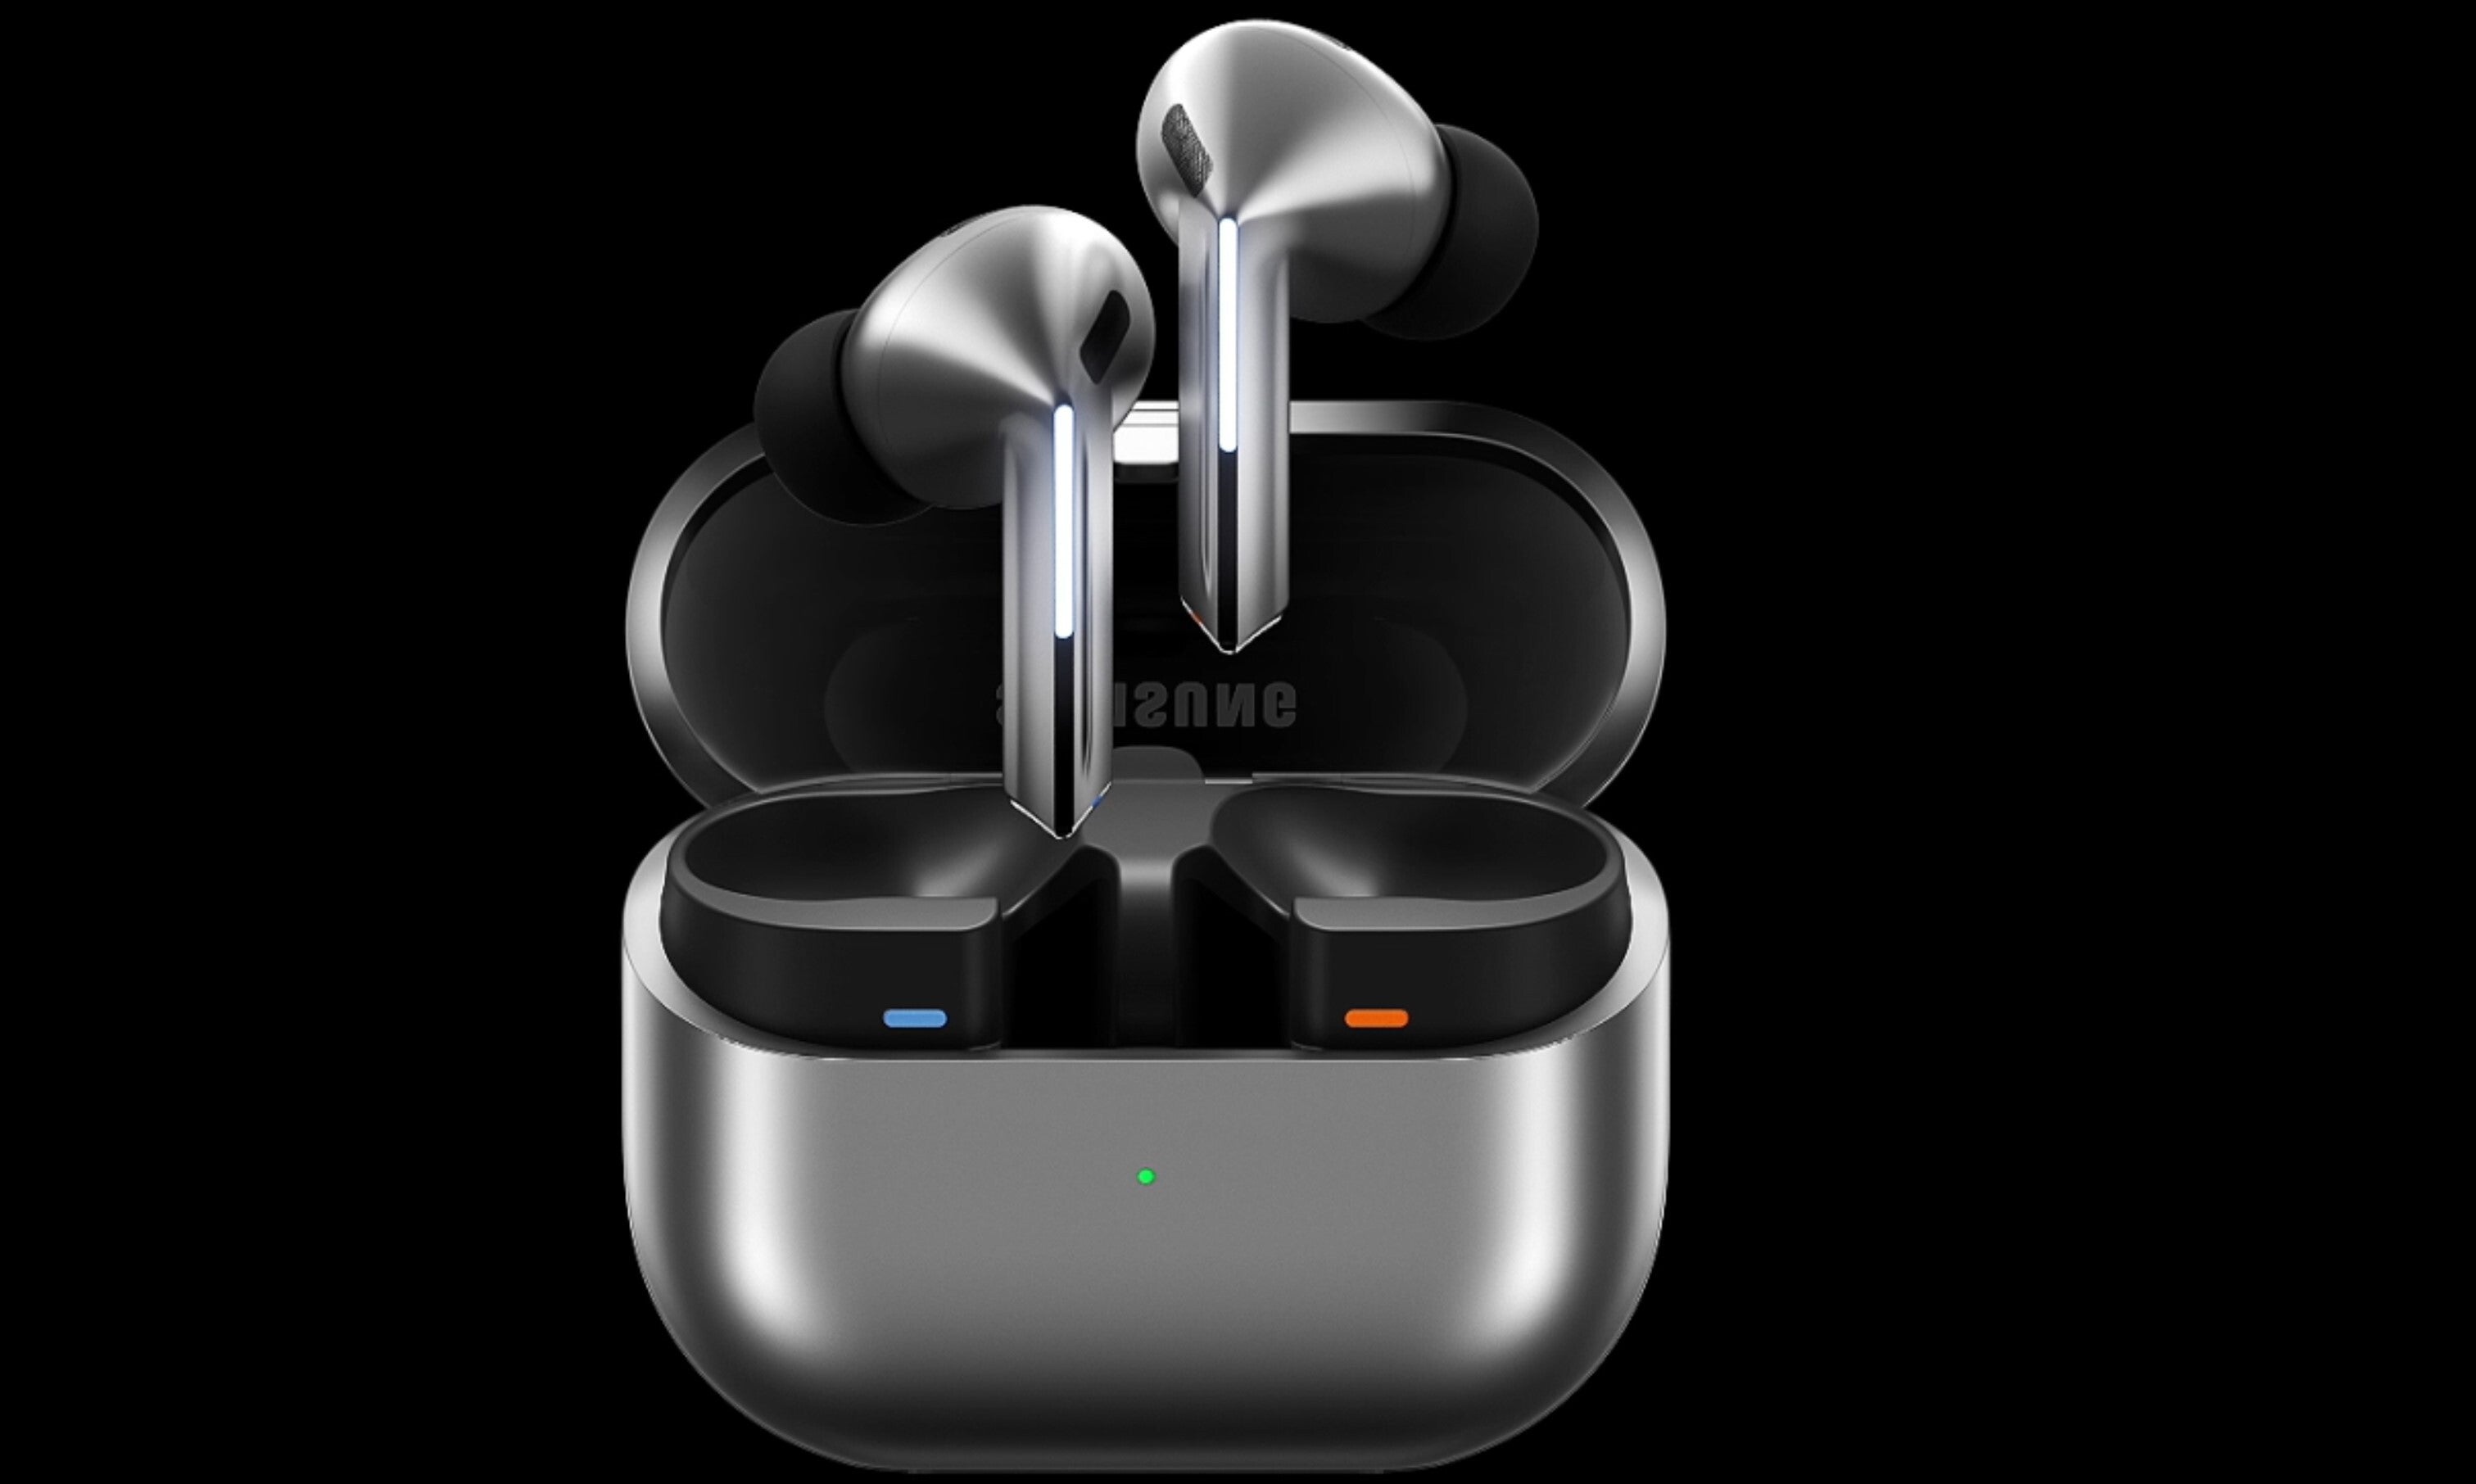 The Galaxy Buds 3 series cases are an exercise in futuristic design - Apple&#039;s AirPods look downright boring next to the Samsung Galaxy Buds 3 series